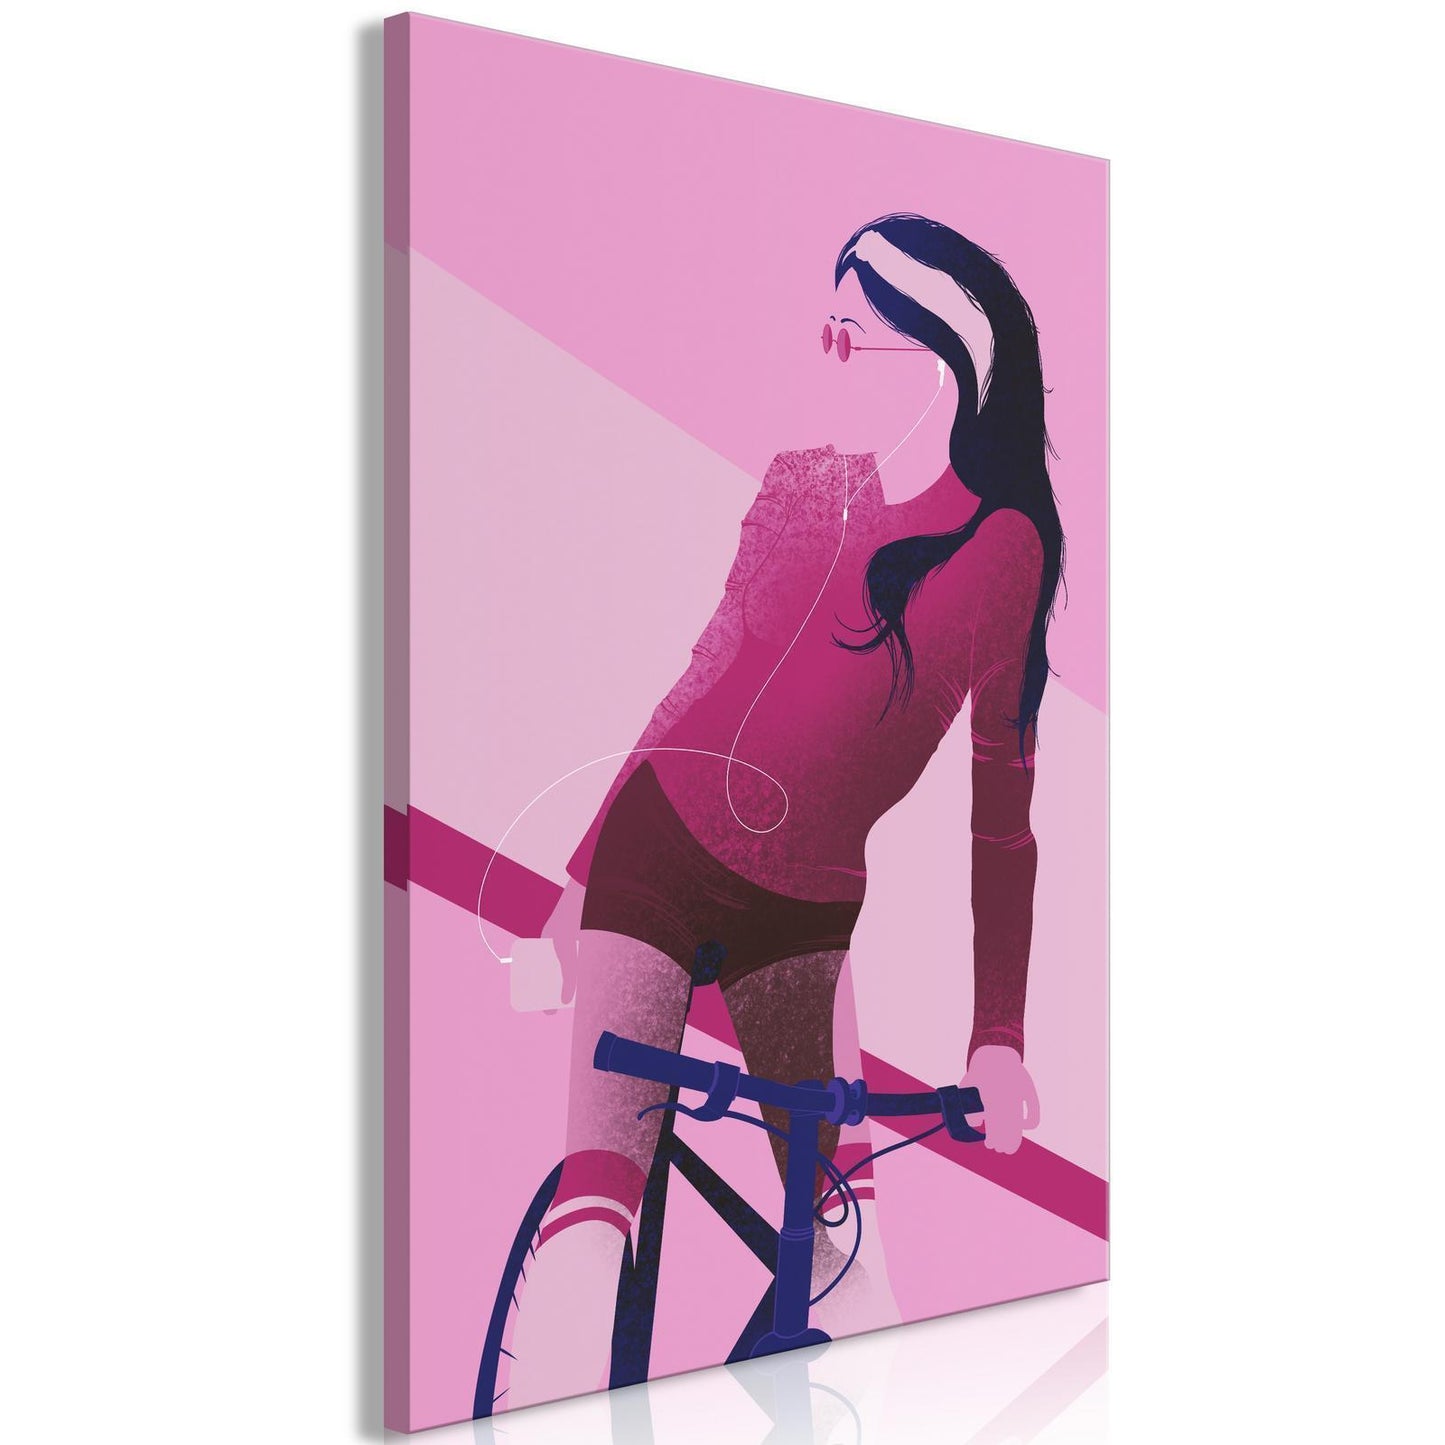 Painting - Woman on Bicycle (1 Part) Vertical